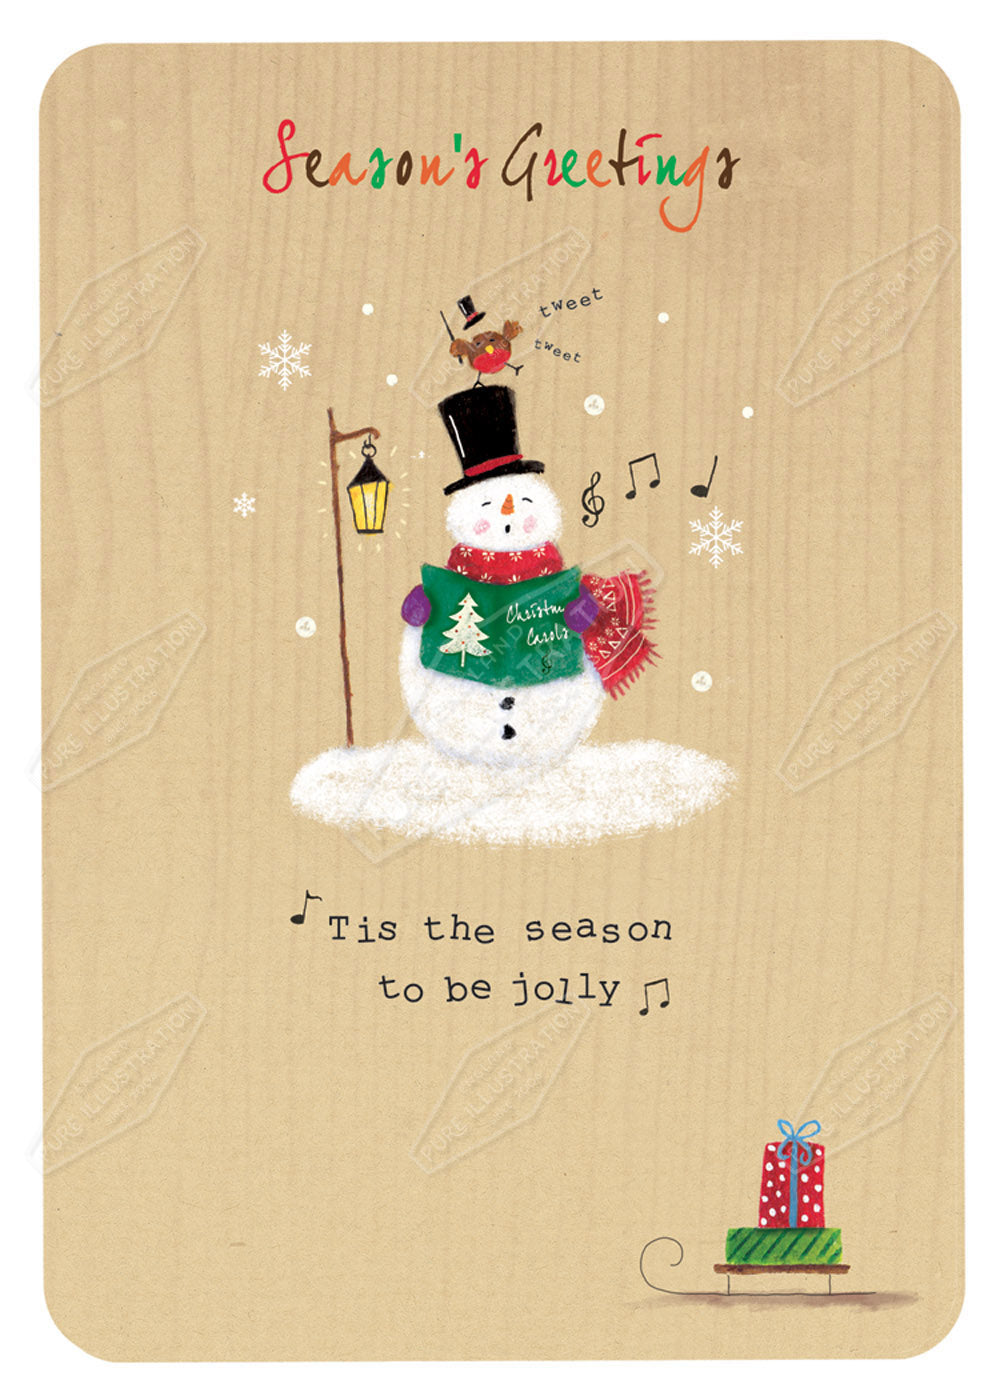 Carolling Snowman by Cory Reid for Pure Art Licensing Agency